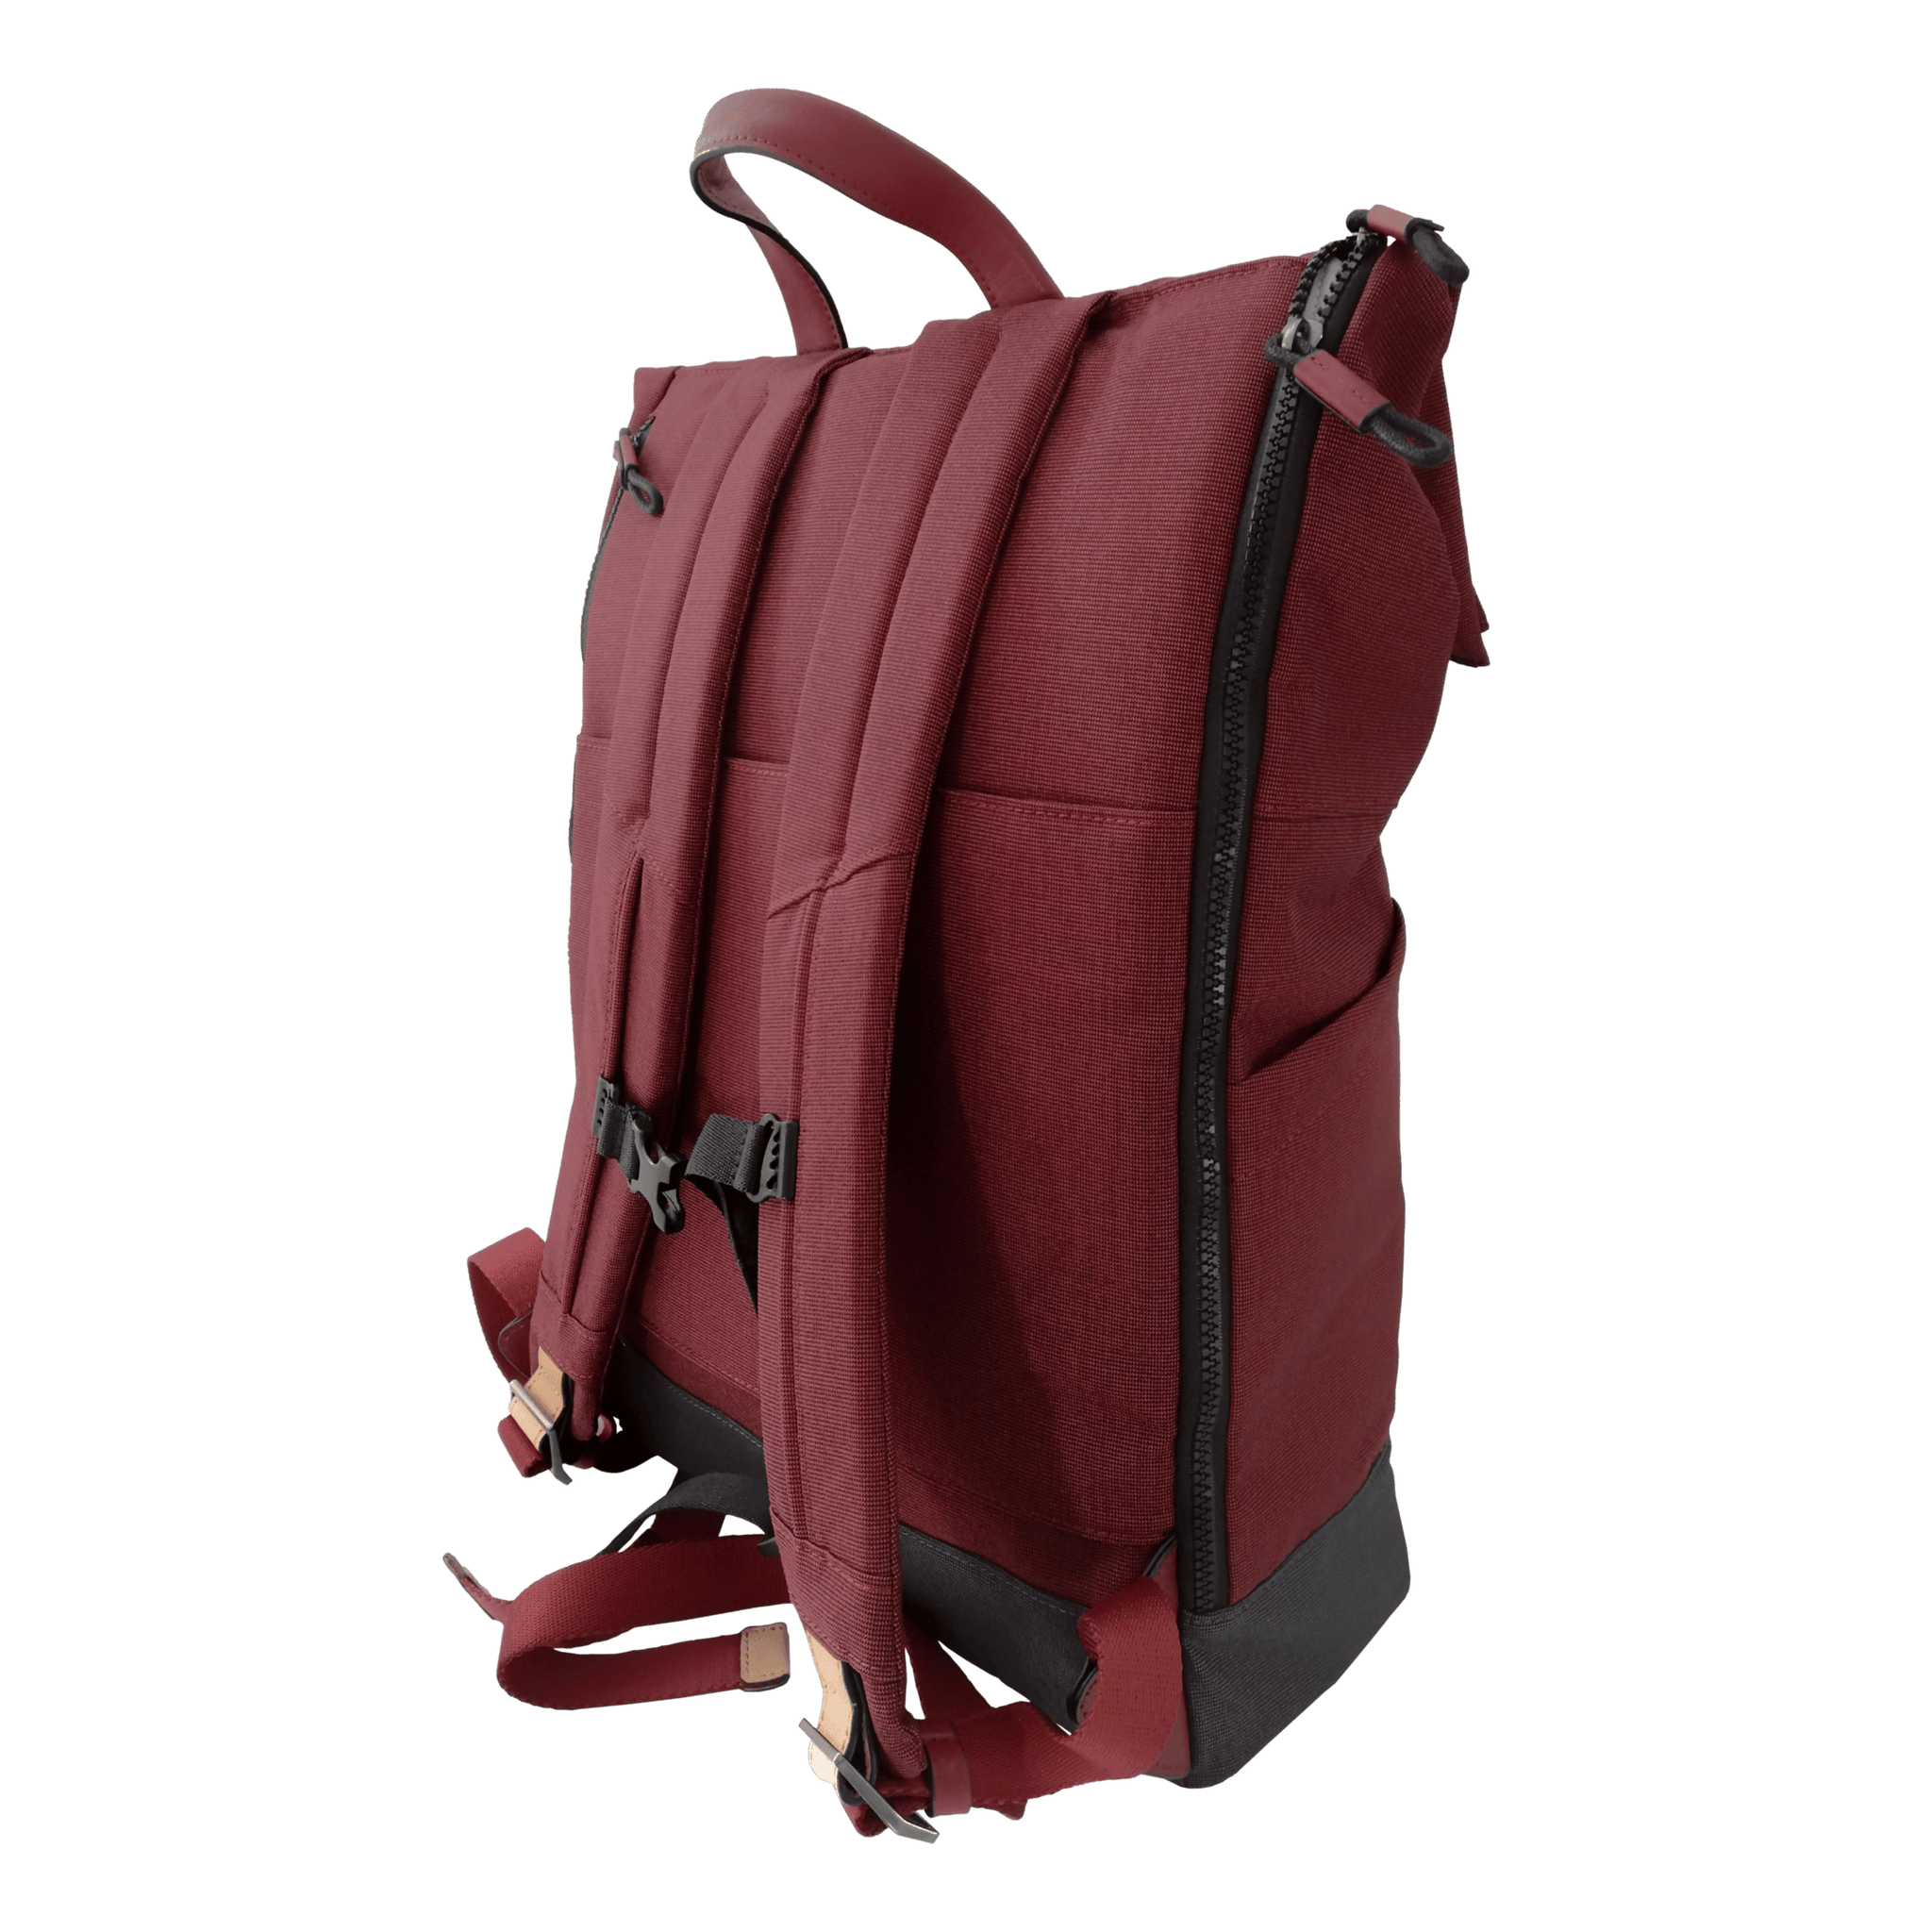 Piquadro Superveloce Limited Edition Backpack | MV Agusta Store